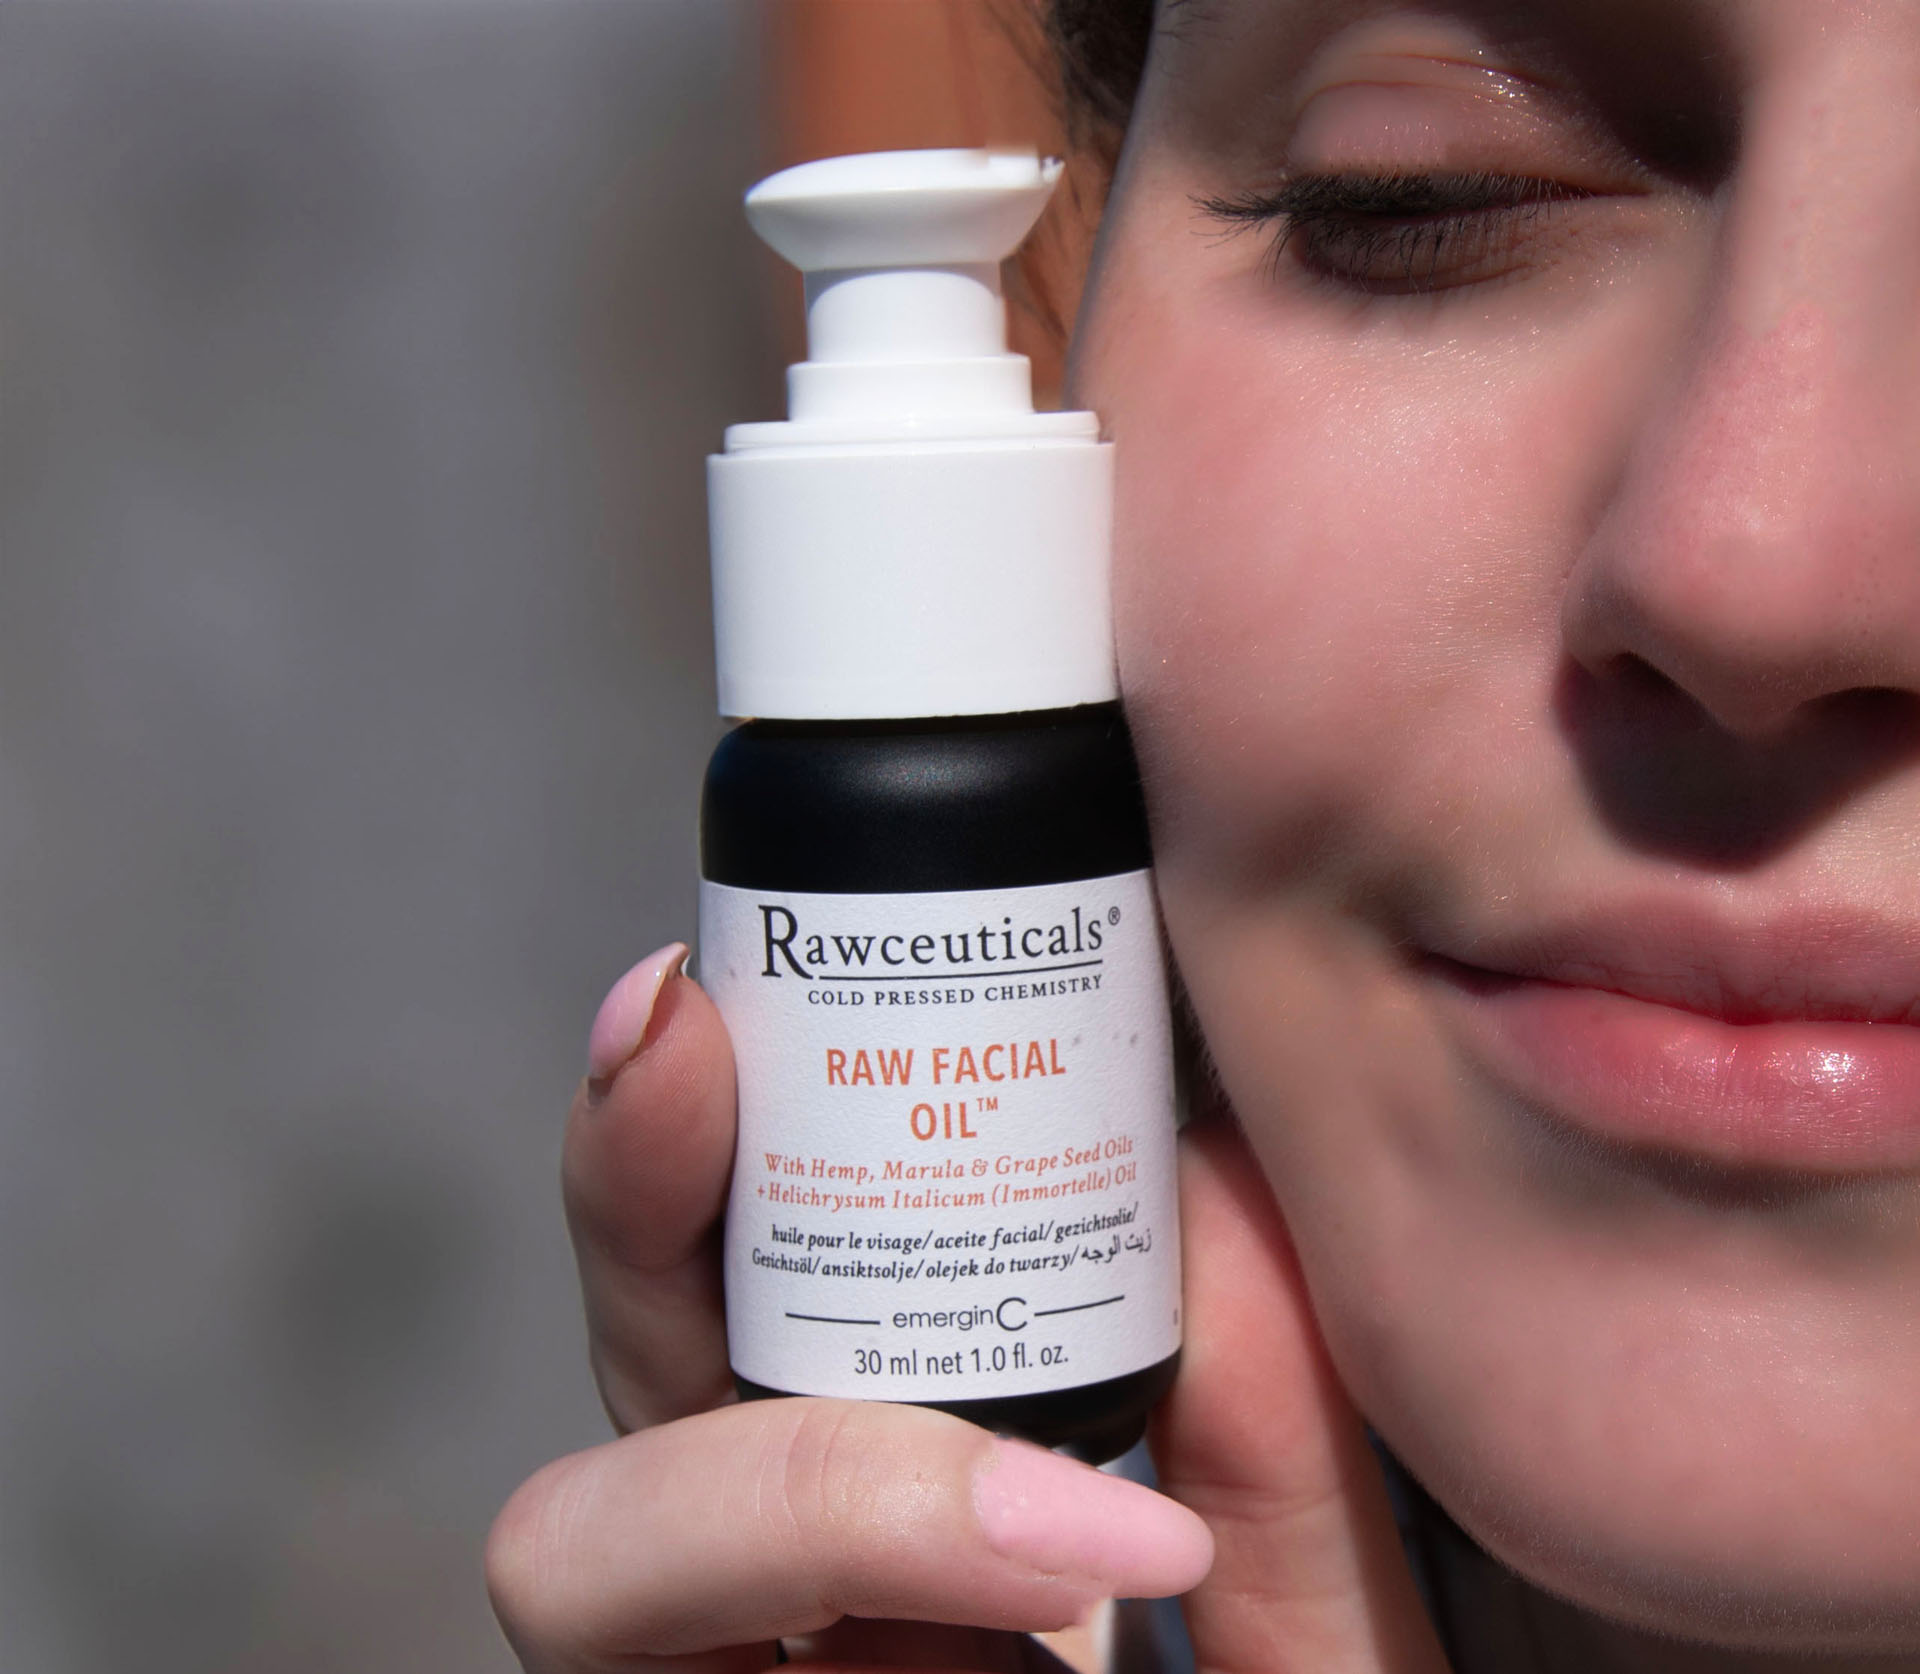 A close-up of a person holding a bottle of rawceuticals facial oil next to their cheek, highlighting the product's natural ingredients for skincare.